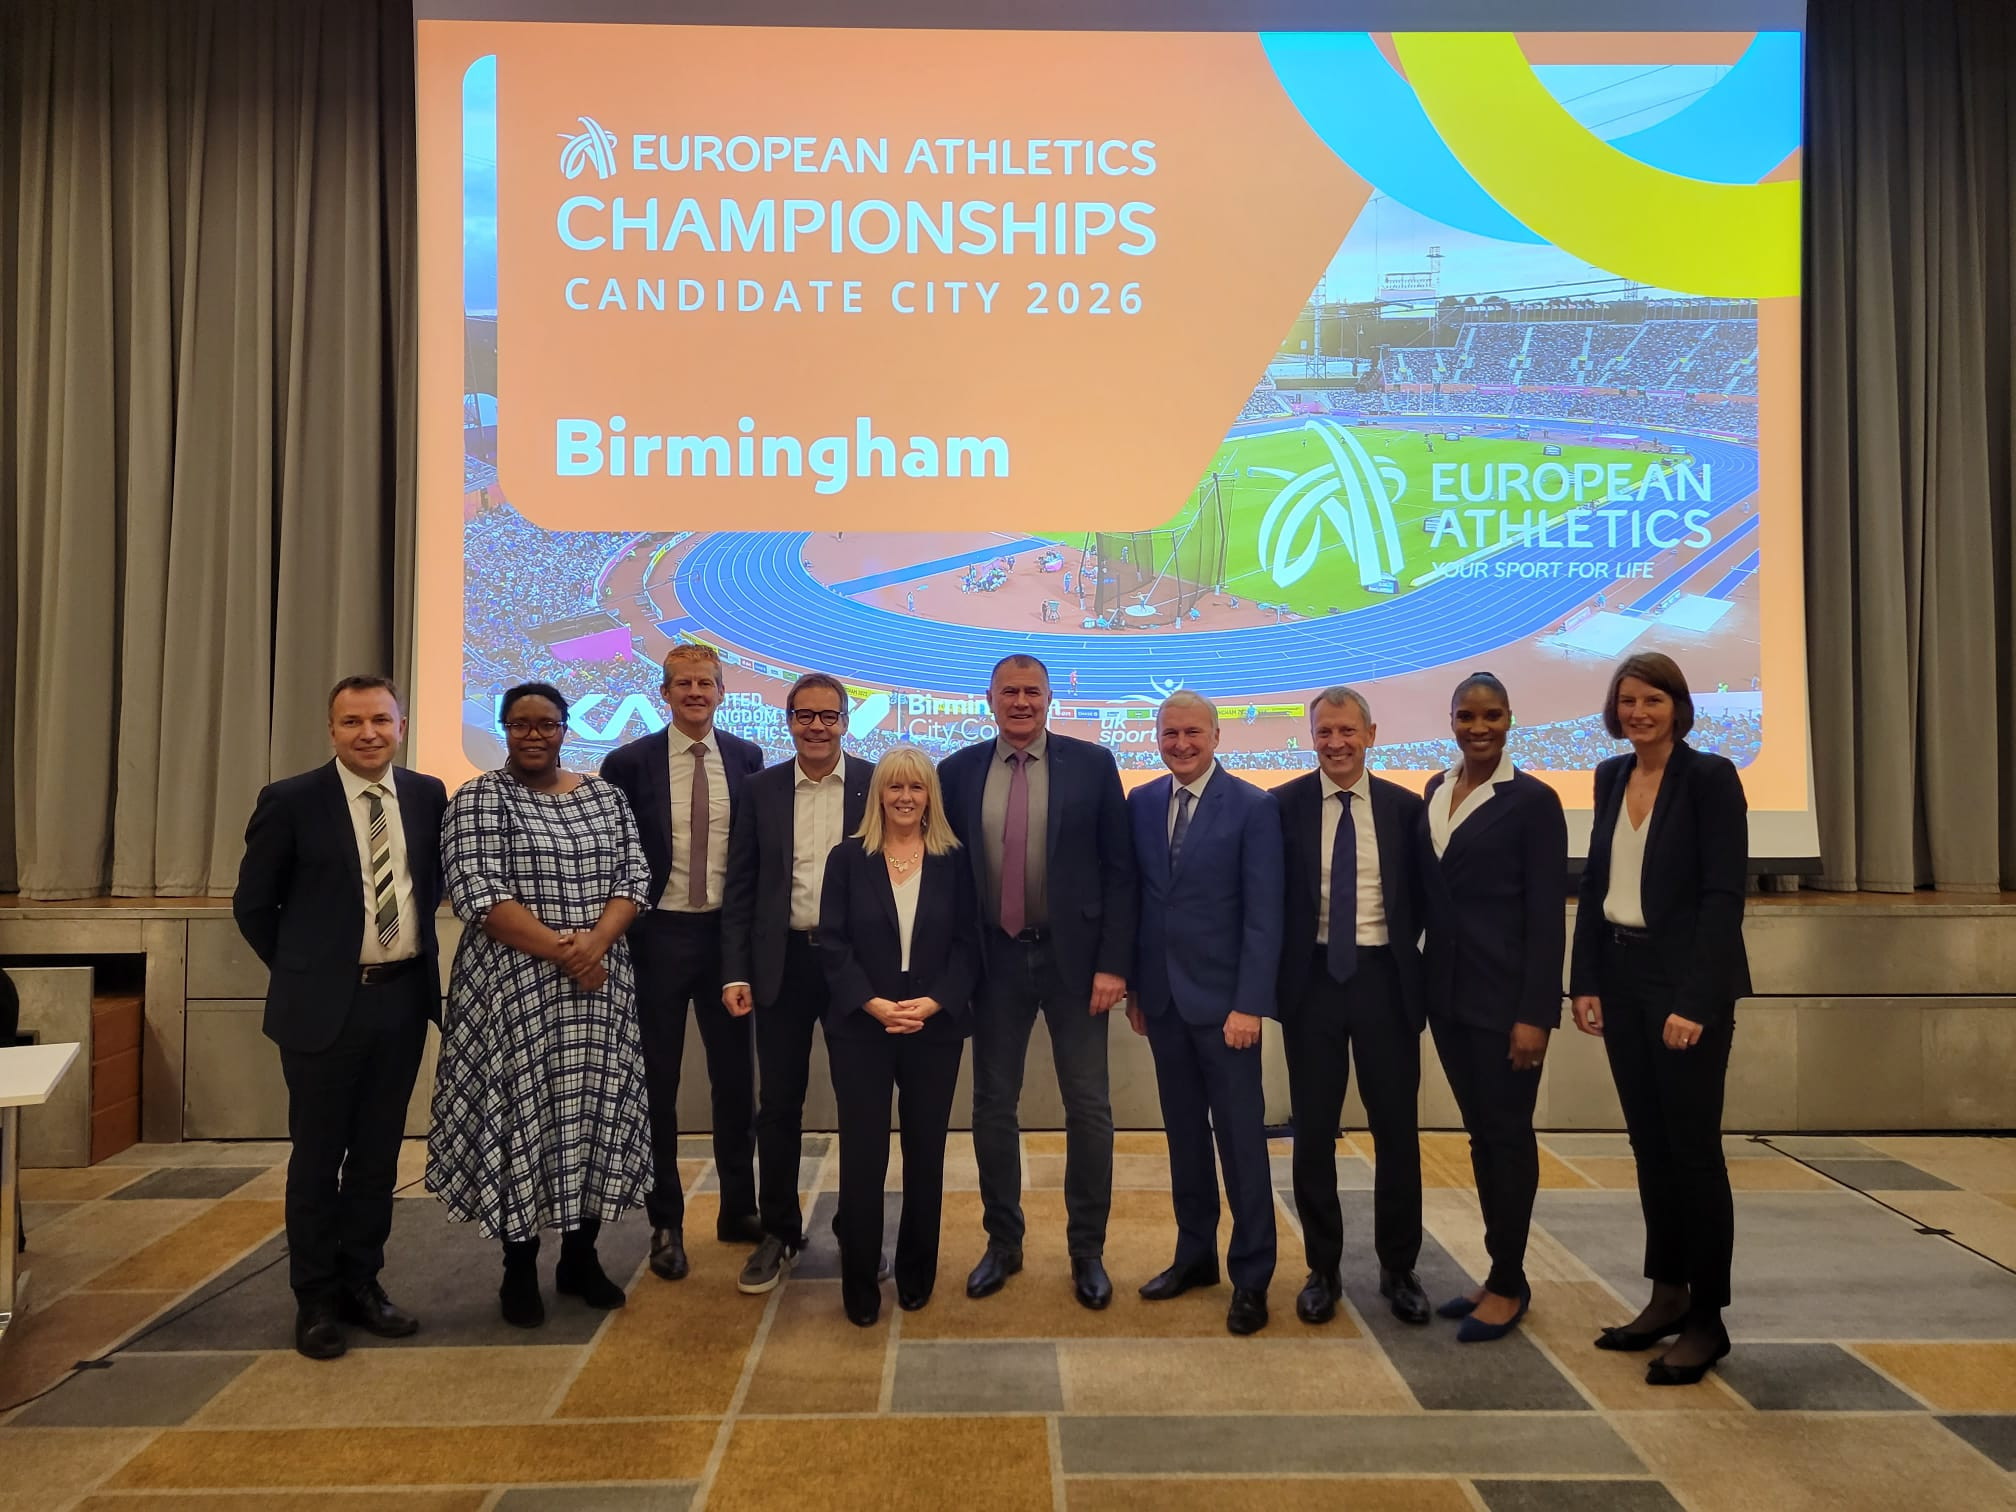 Birmingham will become the first British city to stage the European Athletics Championships when it hosts the event in 2026 at the re-built Alexander Stadium ©European Athletics